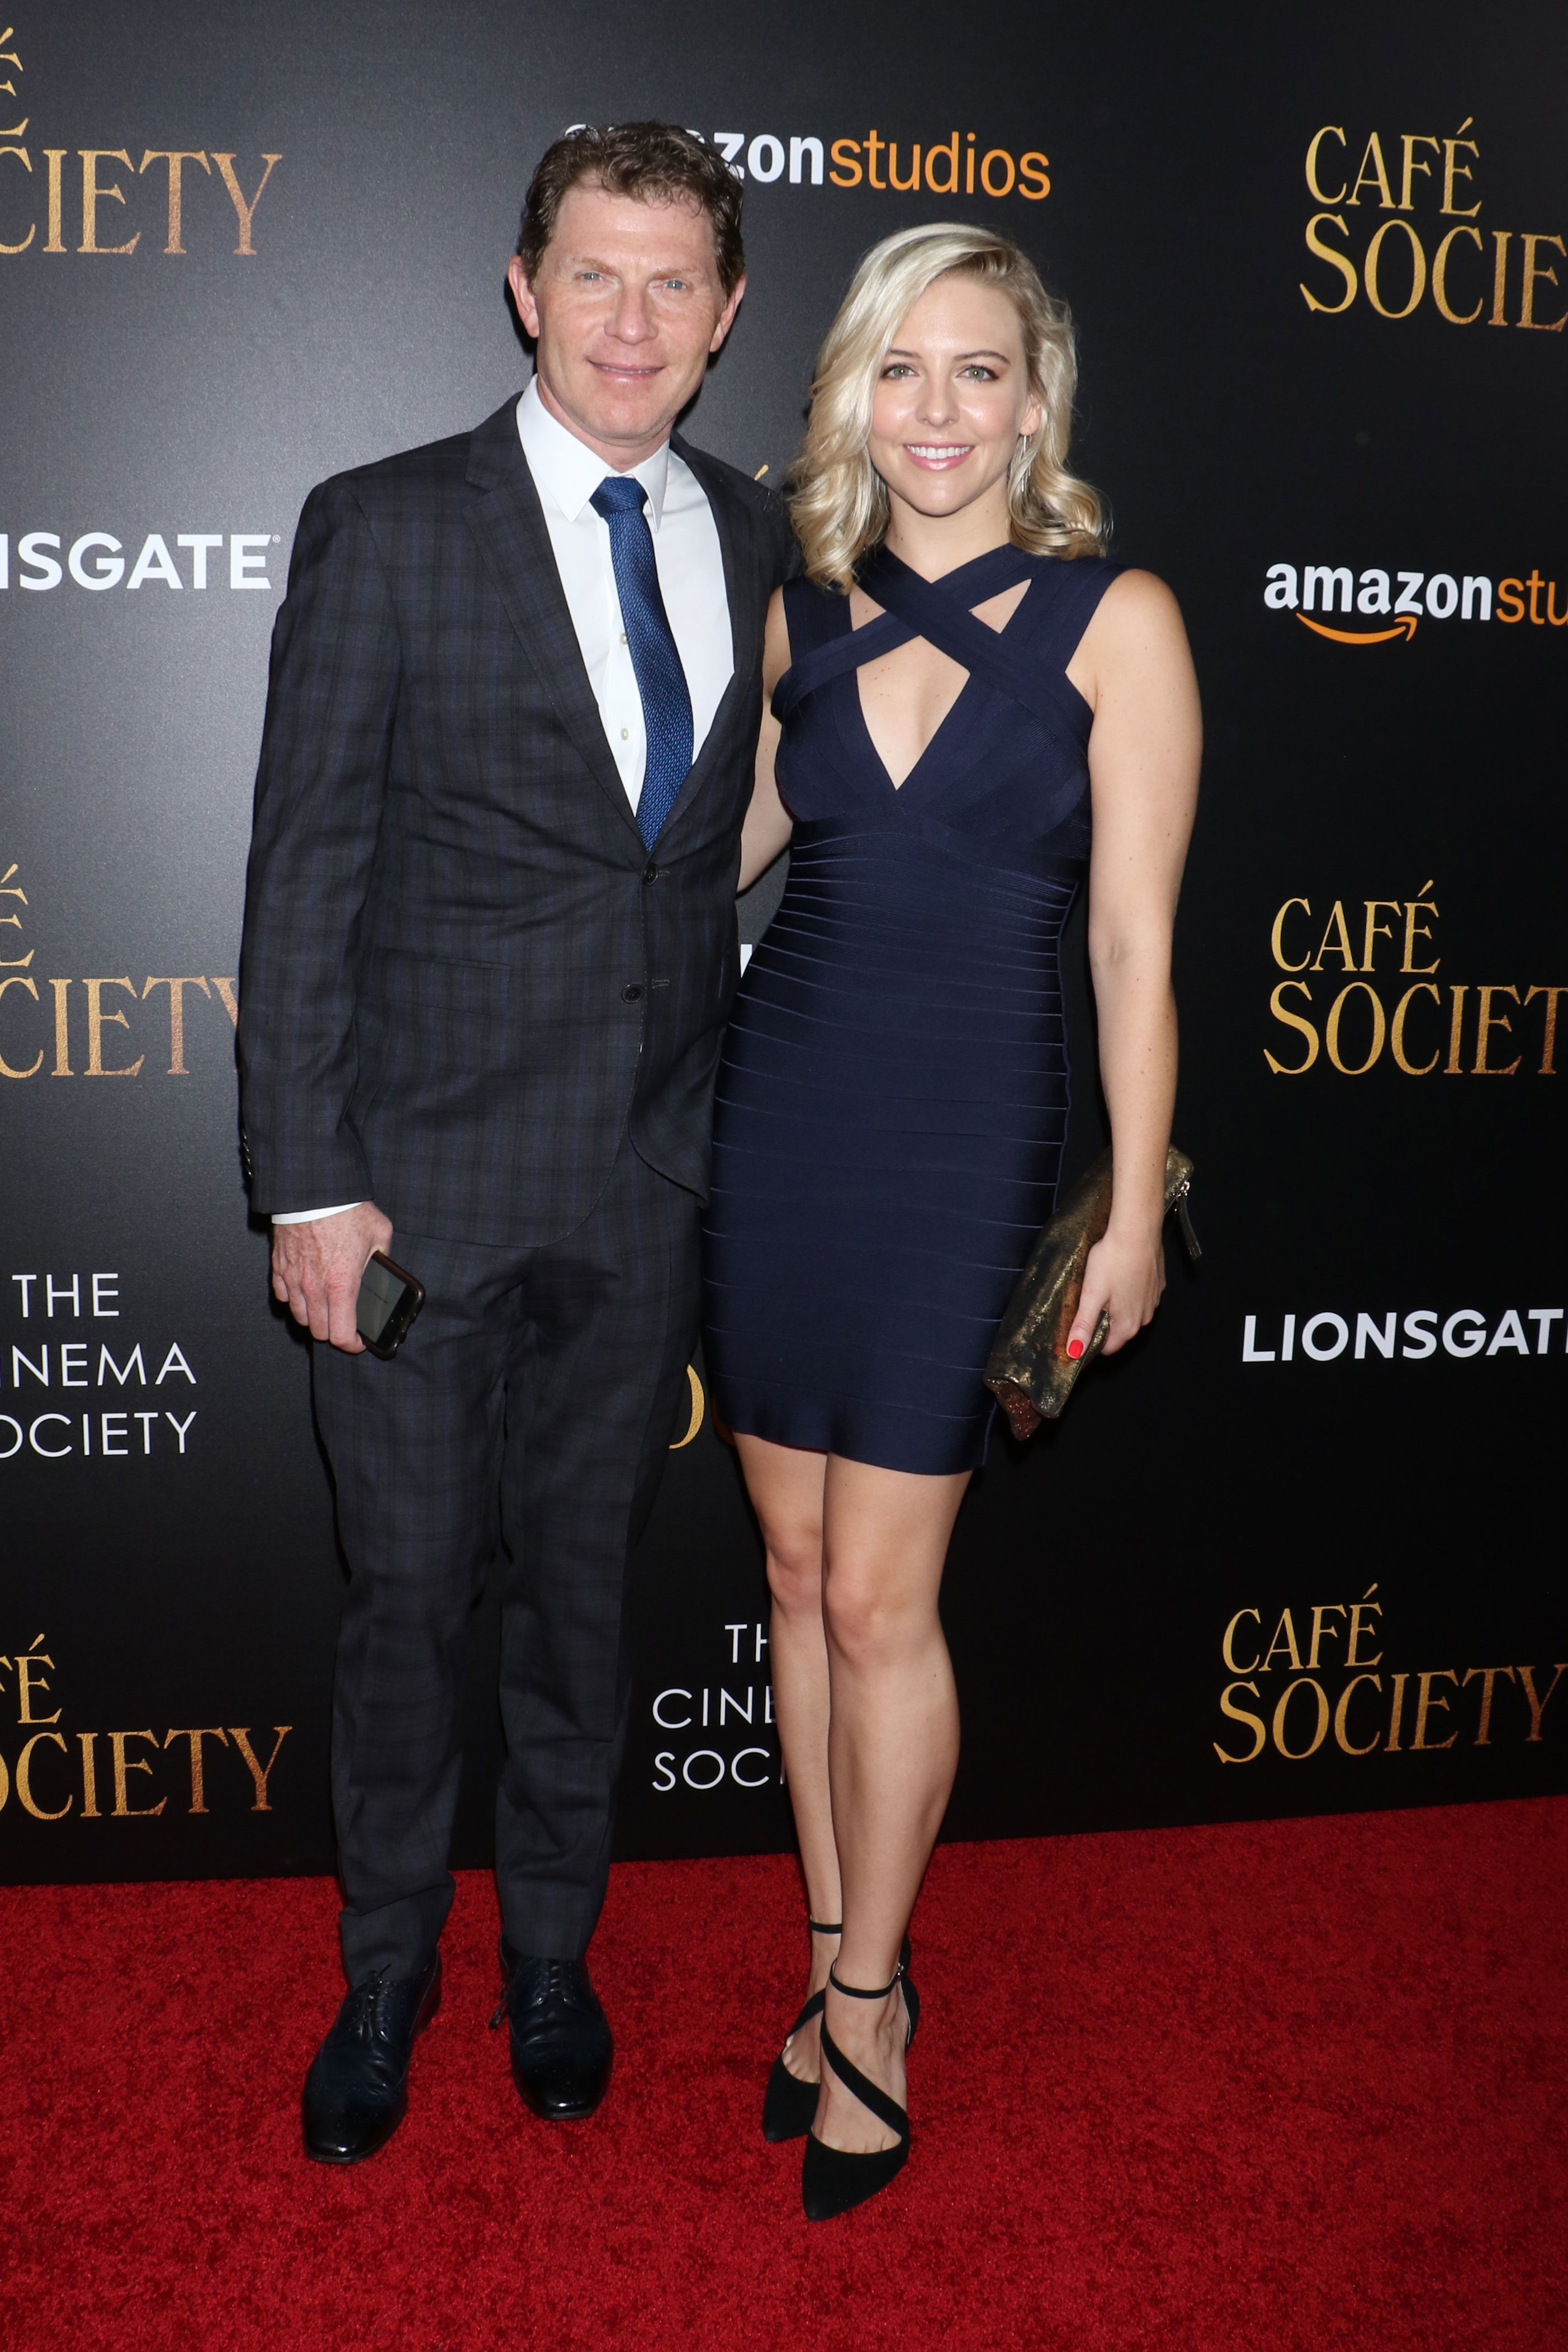 <p>Celebrity chef Bobby Flay, who divorced actress Stephanie March in 2015, stared dating "Masters of Sex" and "Quantico" actress Helene Yorke in early 2016. In May 2017, he revealed how they met. "So I'm going to let you in on a little secret," he said during an episode of his Food Network show "Beat Bobby Flay," where Helene happened to be a guest. "Last season I went to a Knick game and I met Helene. Now we kind of date." According to her, they hit it off immediately. "I was like who's this sweet guy? Who knew?" In late 2019, Bobby said he was single, indicating that he and Helene had called it quits.</p>